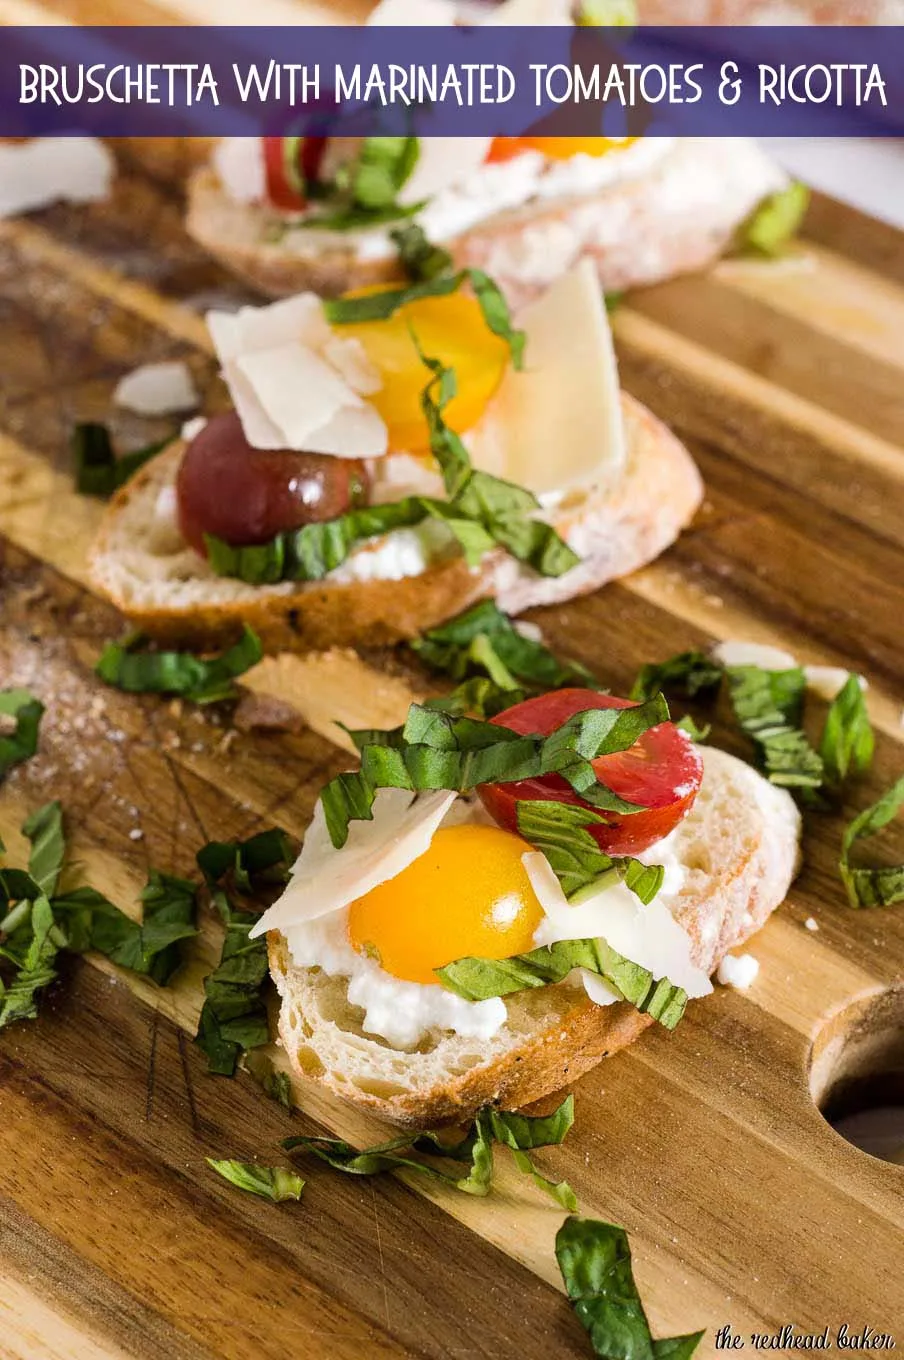 Bruschetta with marinated tomatoes and ricotta is an easy appetizer that epitomizes summer. Using multicolored cherry tomatoes adds visual interest. #FarmersMarketWeek” width=